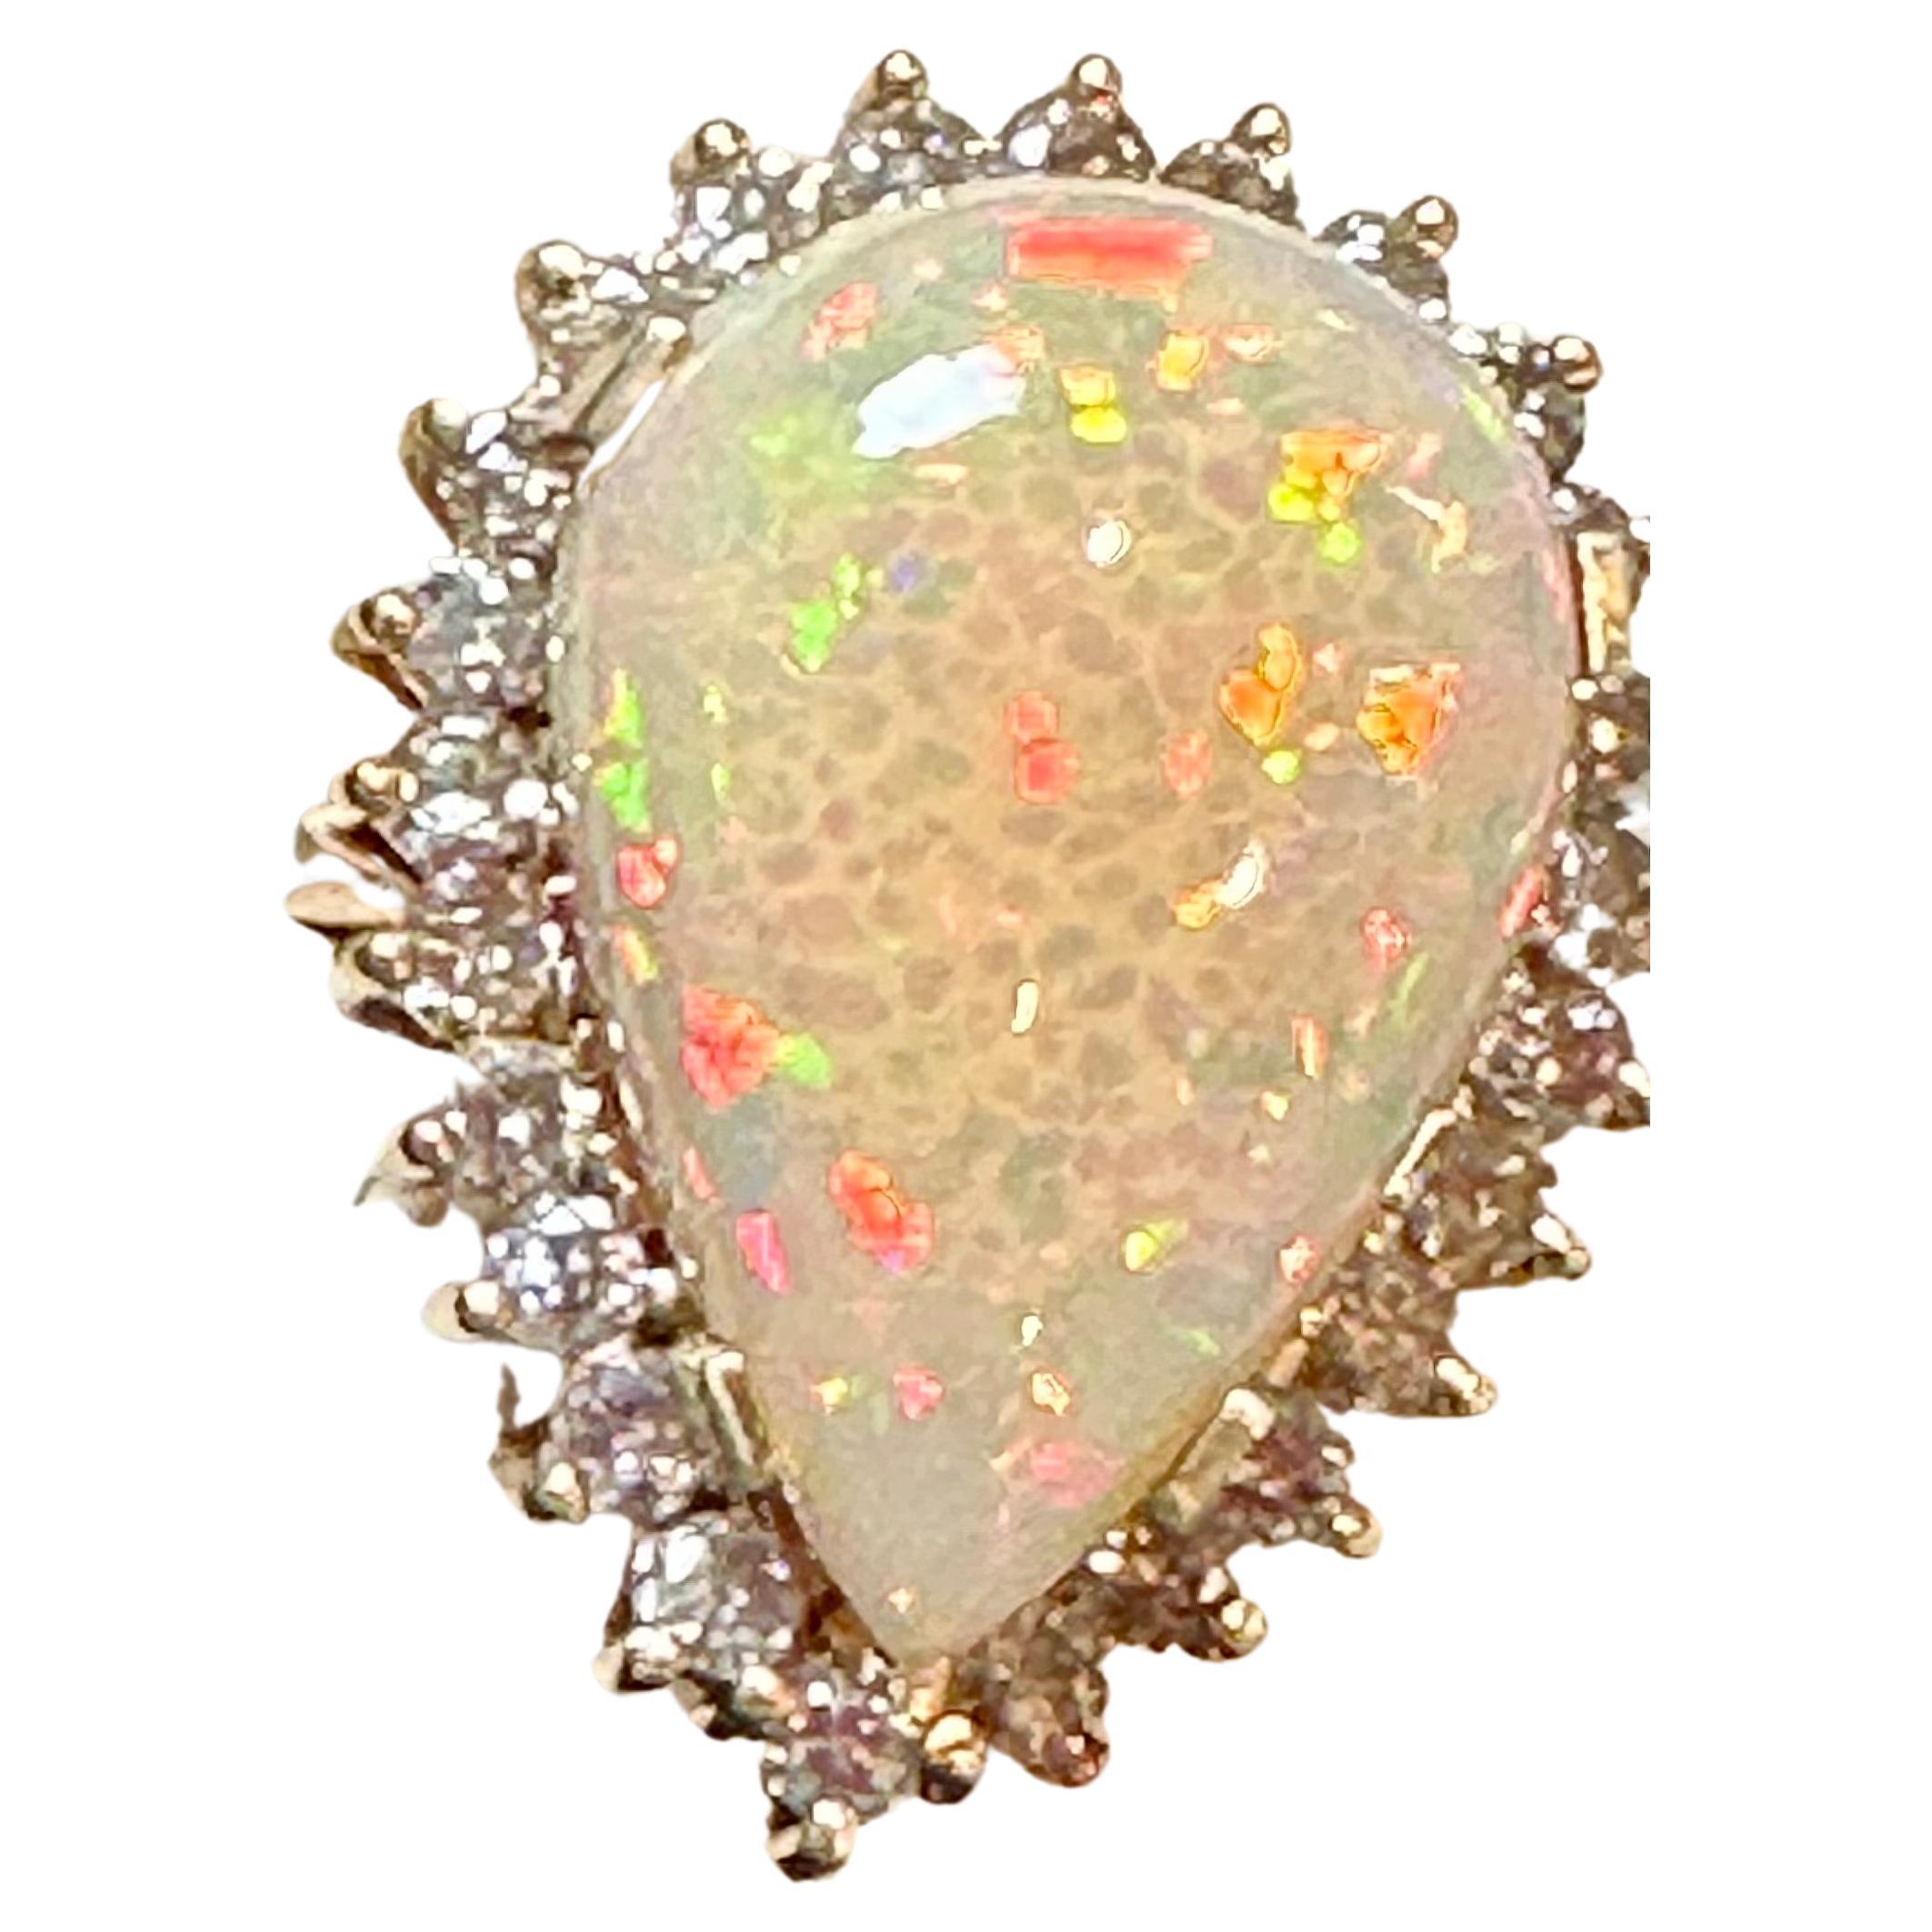 Introducing a timeless cocktail ring featuring a stunning 30-carat pear-shaped opal and diamond. This ring showcases a natural opal with mesmerizing colors, exhibiting excellent quality and clarity. The opal's sizable tear drop shape enhances its